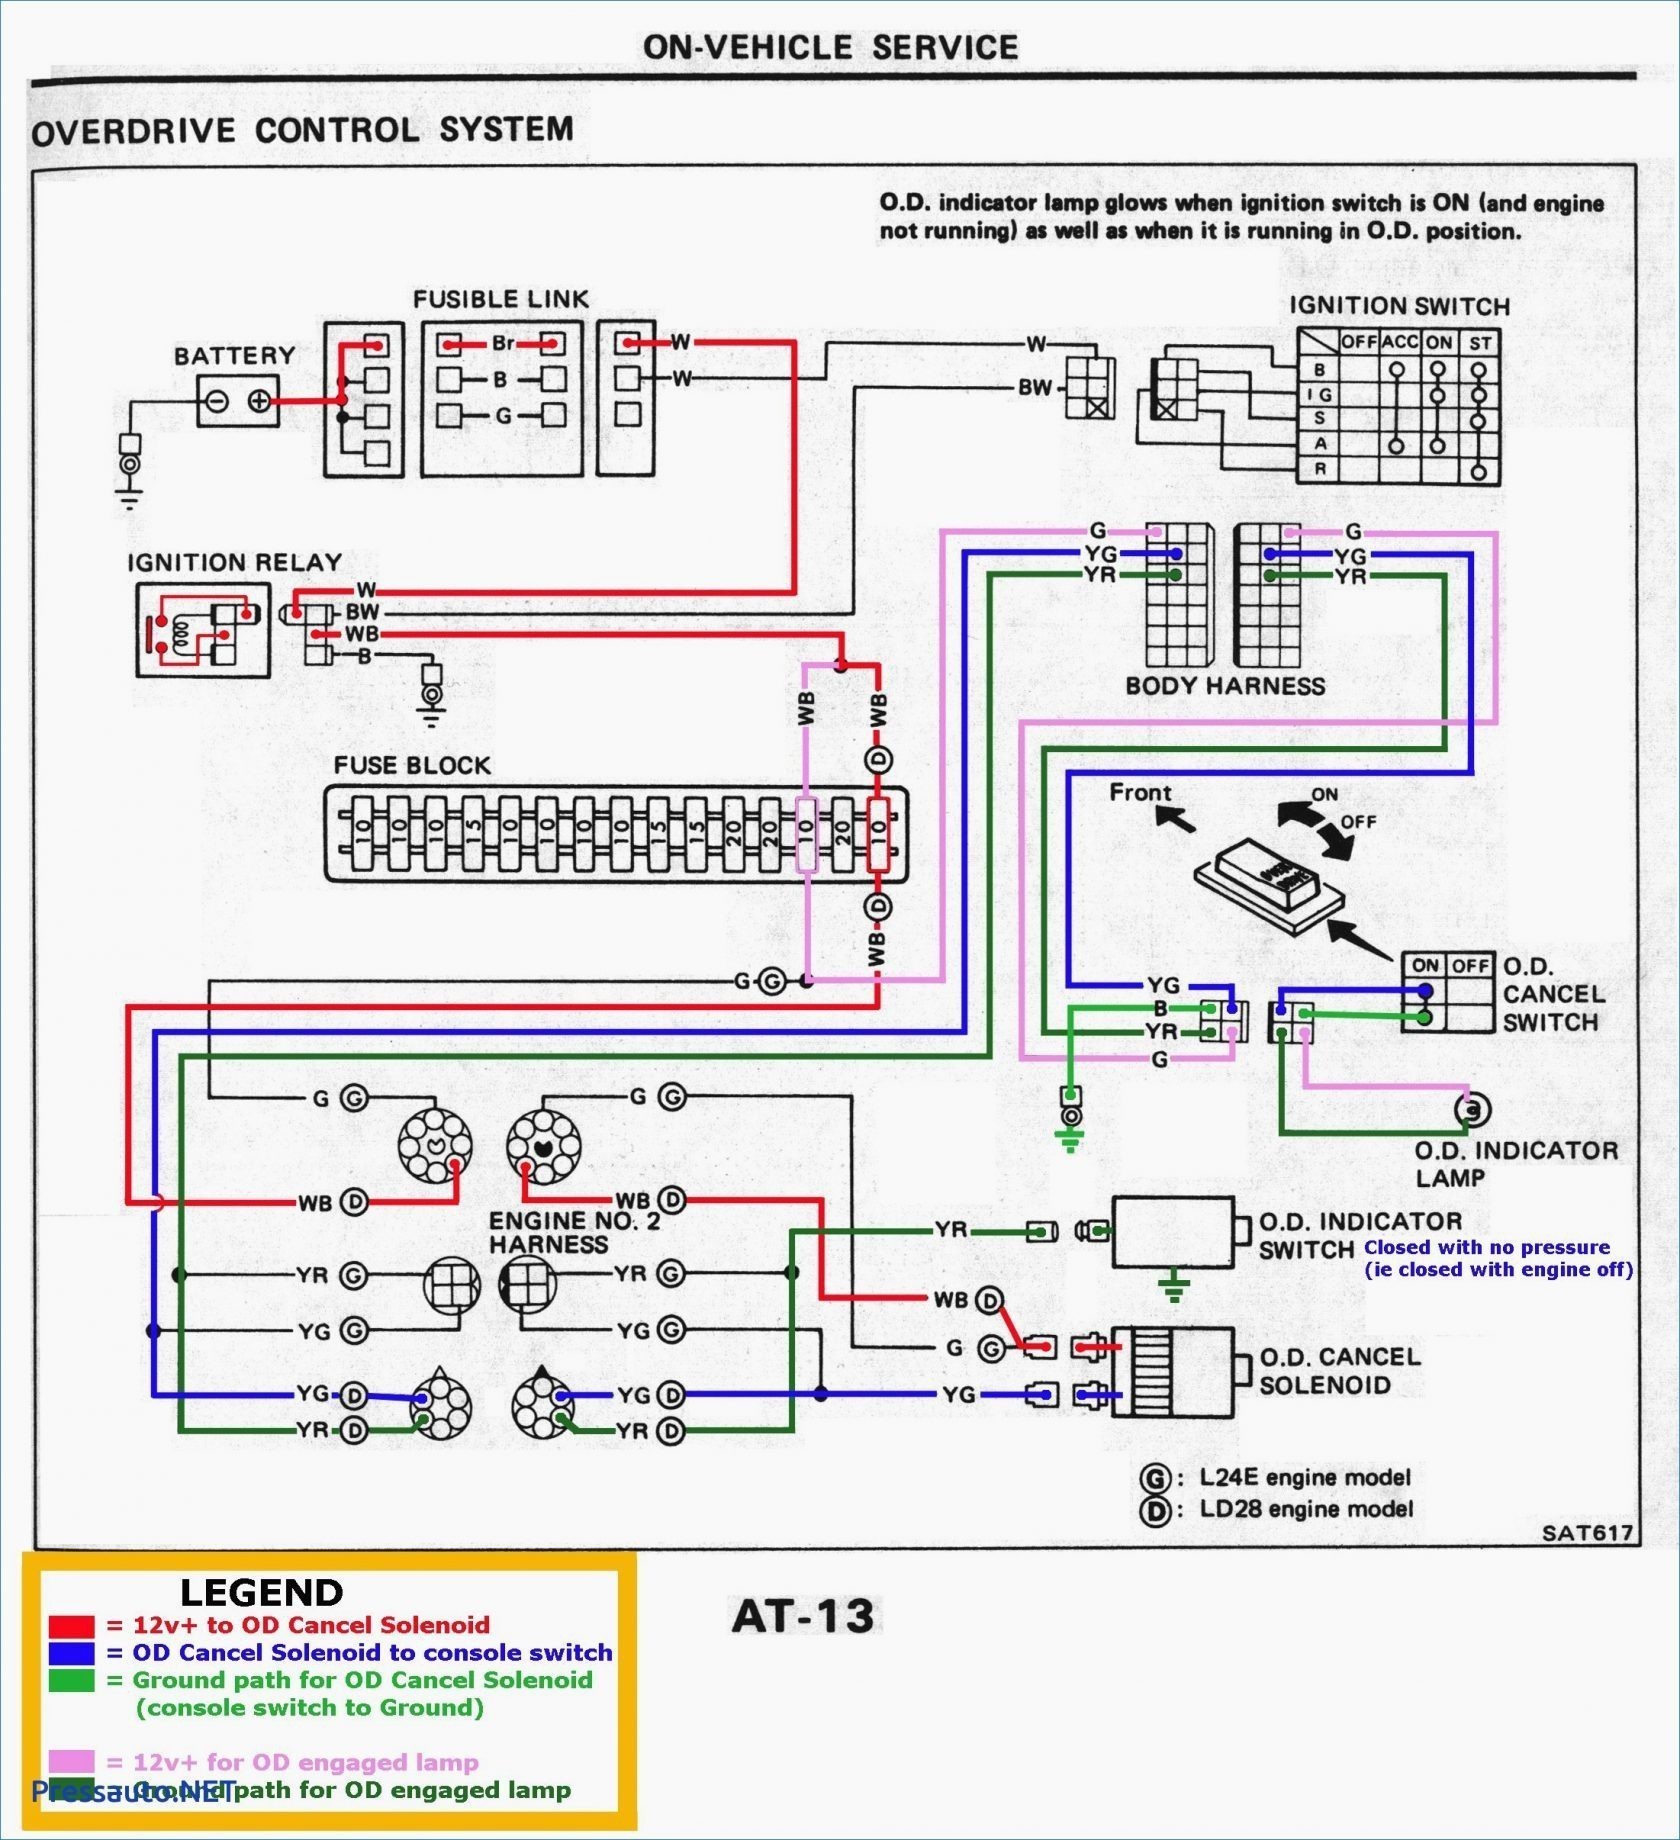 Wiring Diagram for 350 Chevy Engine Bose Wiring Diagrams Of Wiring Diagram for 350 Chevy Engine